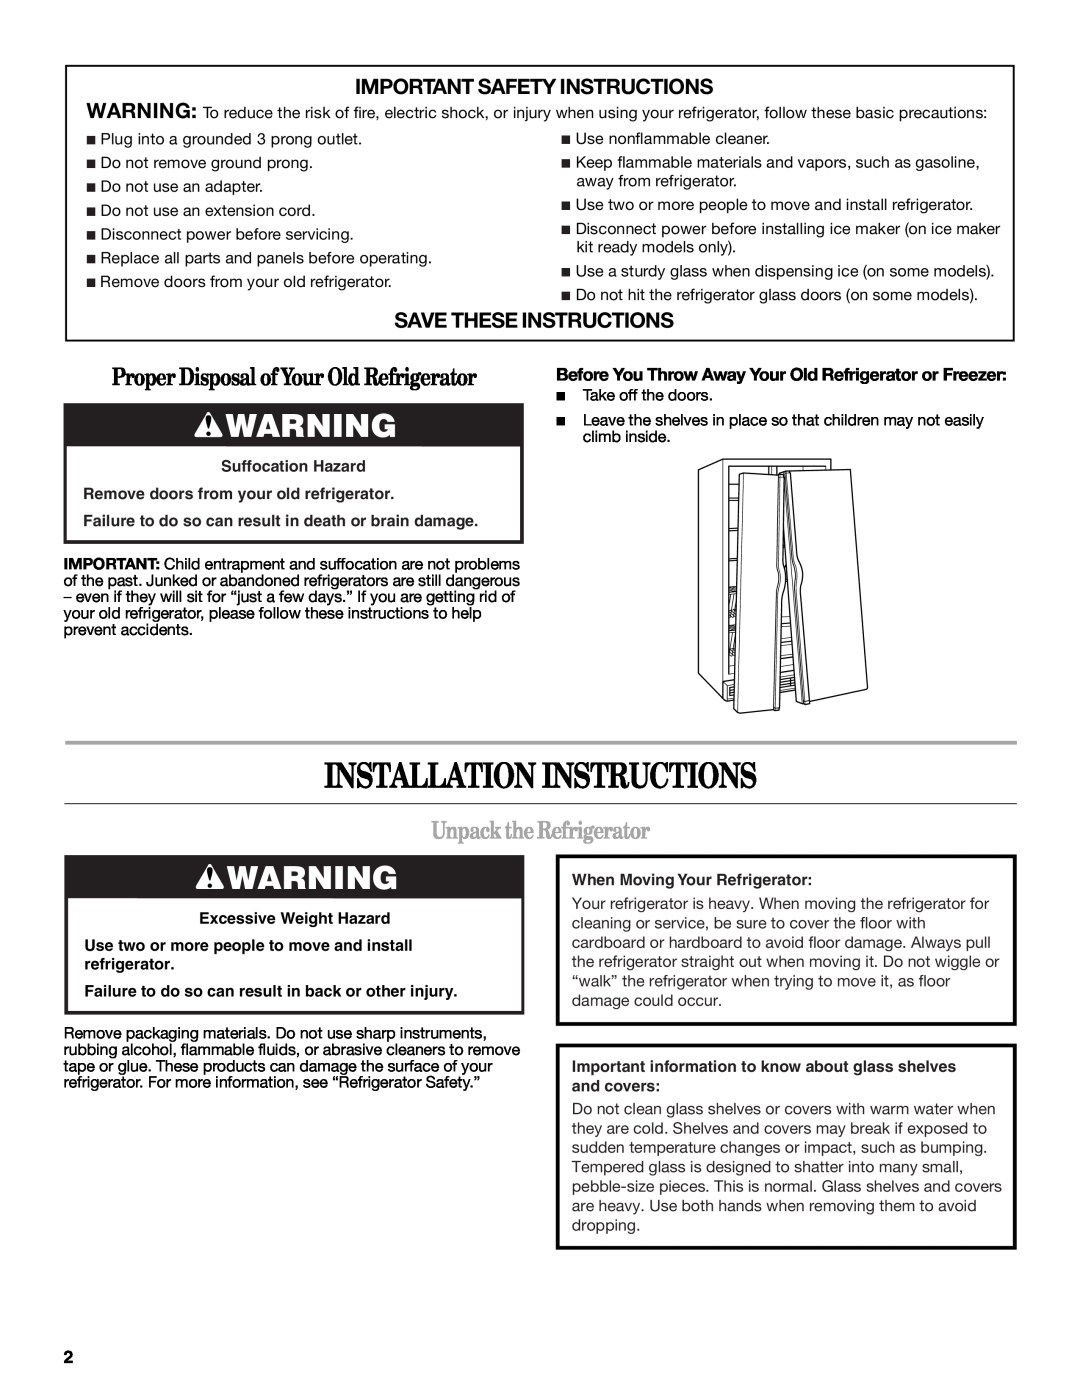 Whirlpool W10193164A Installation Instructions, Unpack the Refrigerator, Important Safety Instructions 